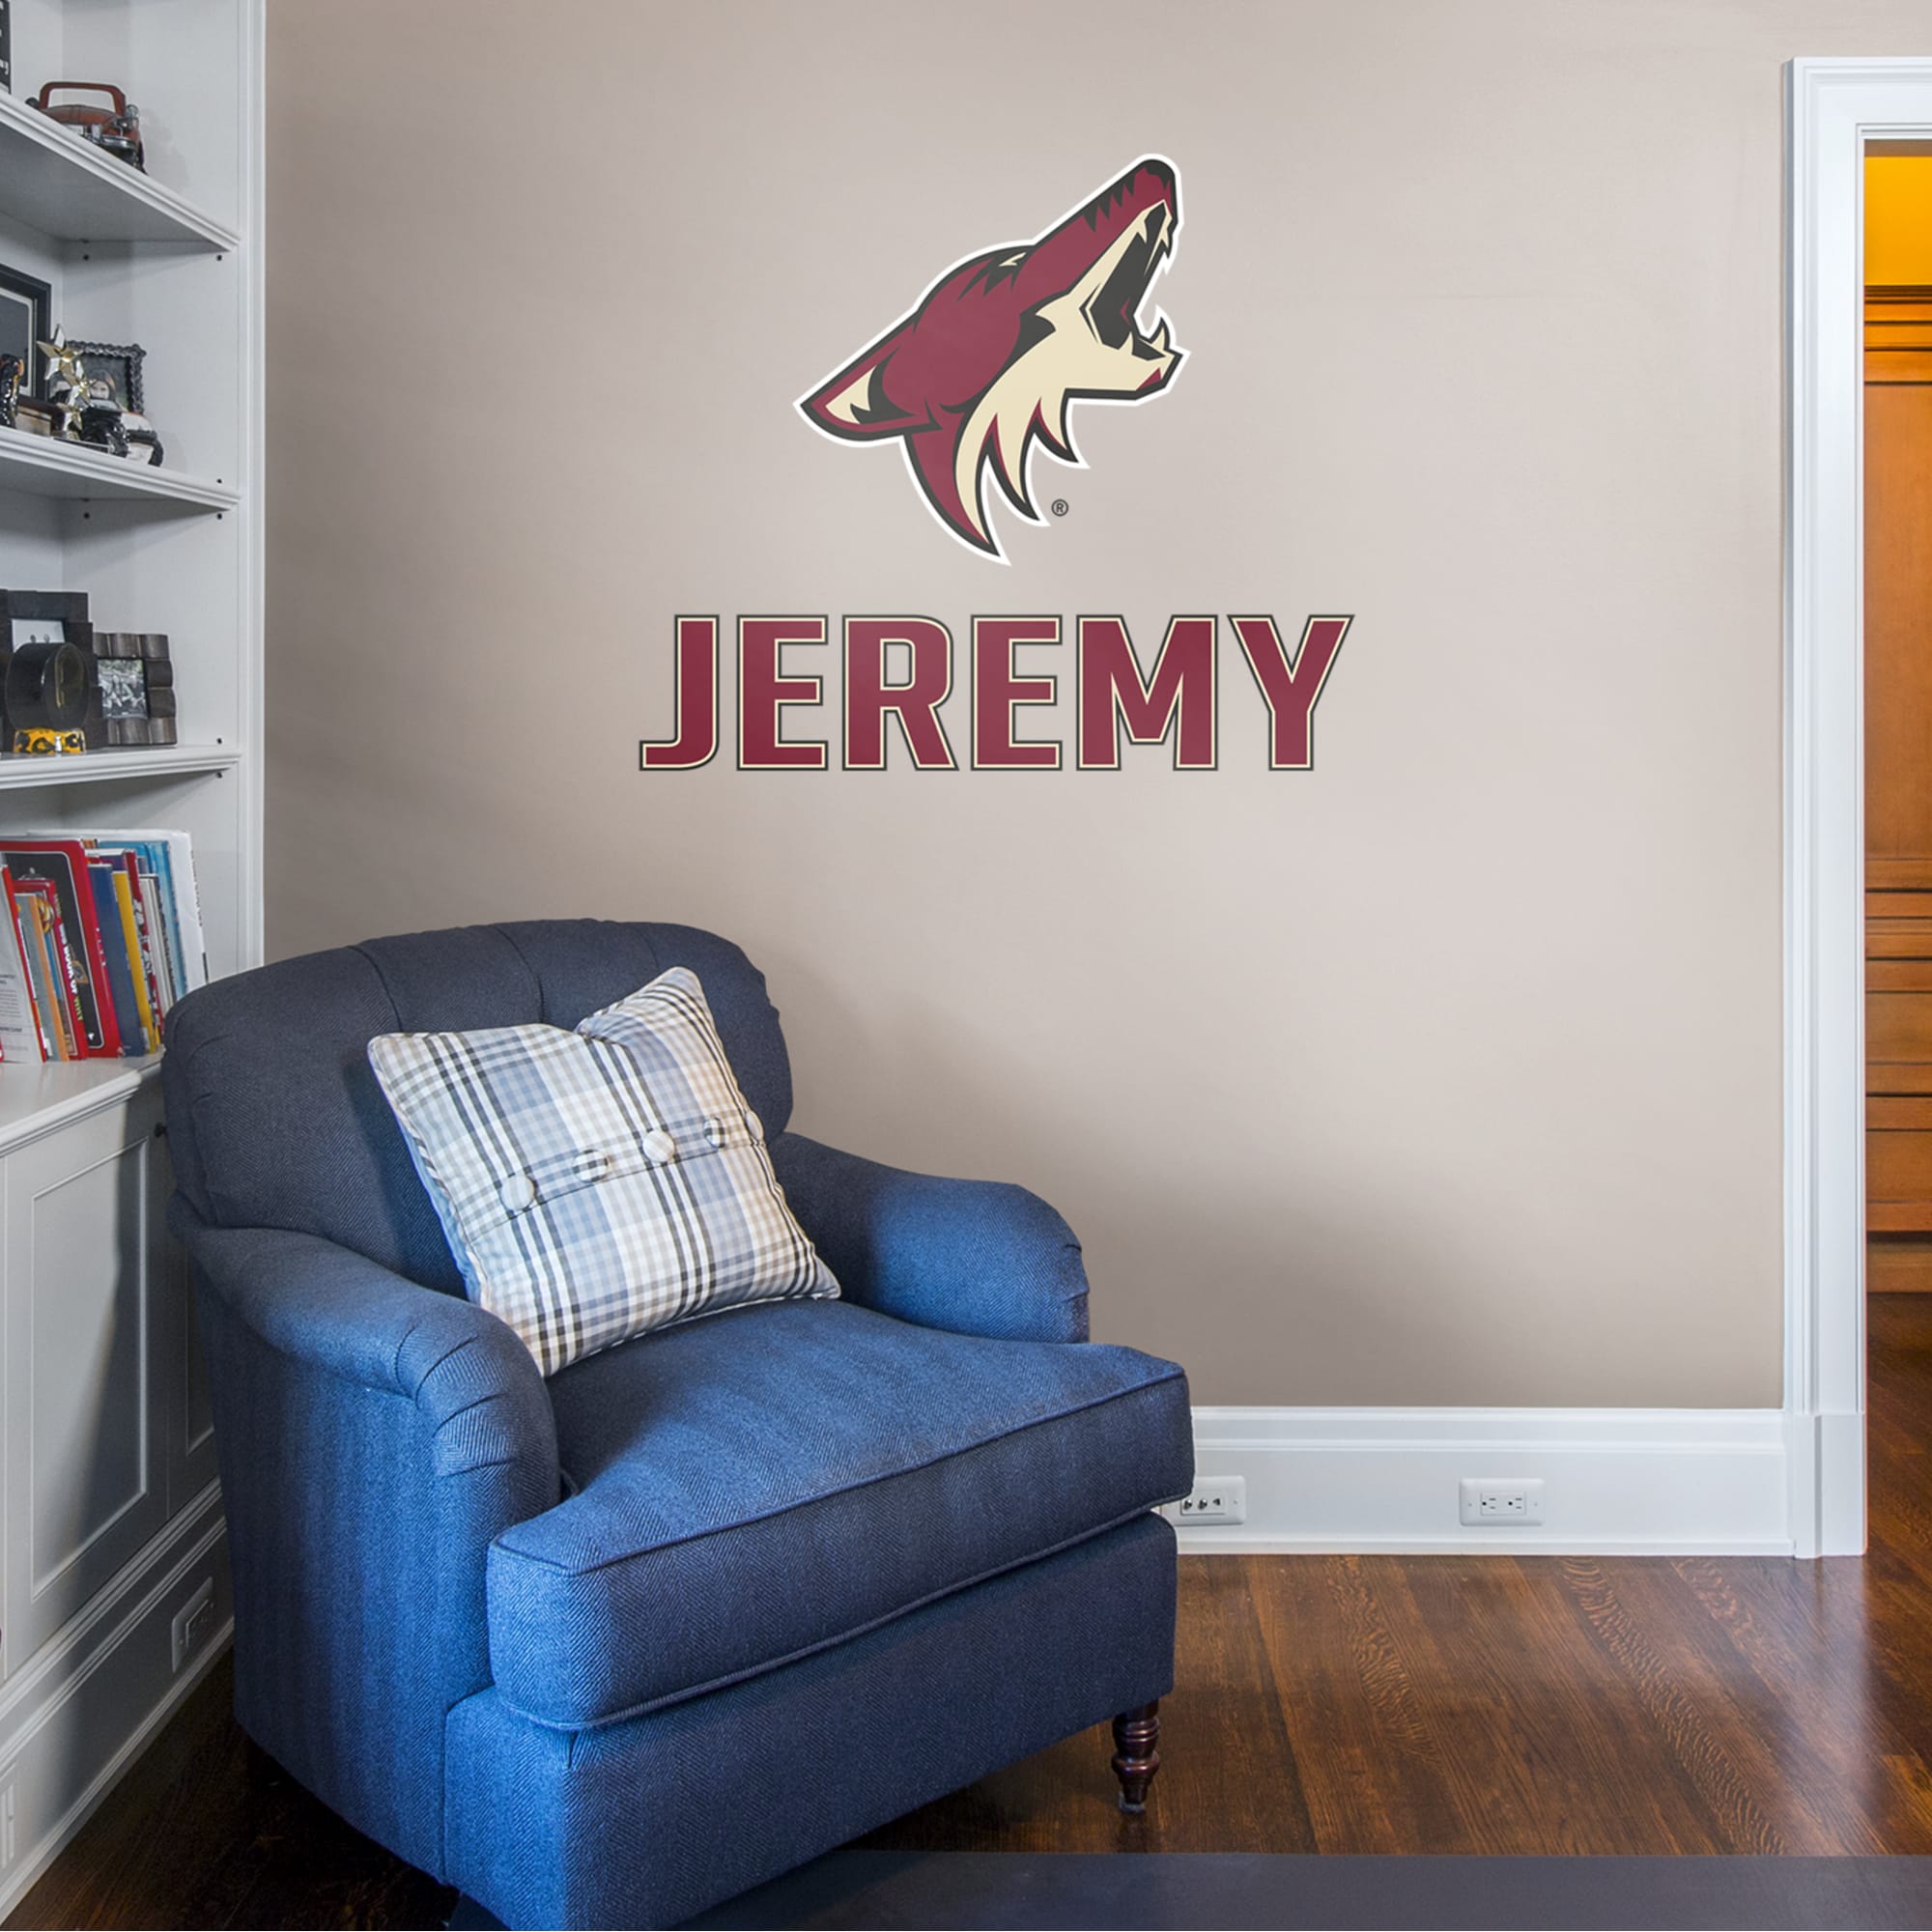 Arizona Coyotes: Stacked Personalized Name - Officially Licensed NHL Transfer Decal in Red (39.5"W x 52"H) by Fathead | Vinyl